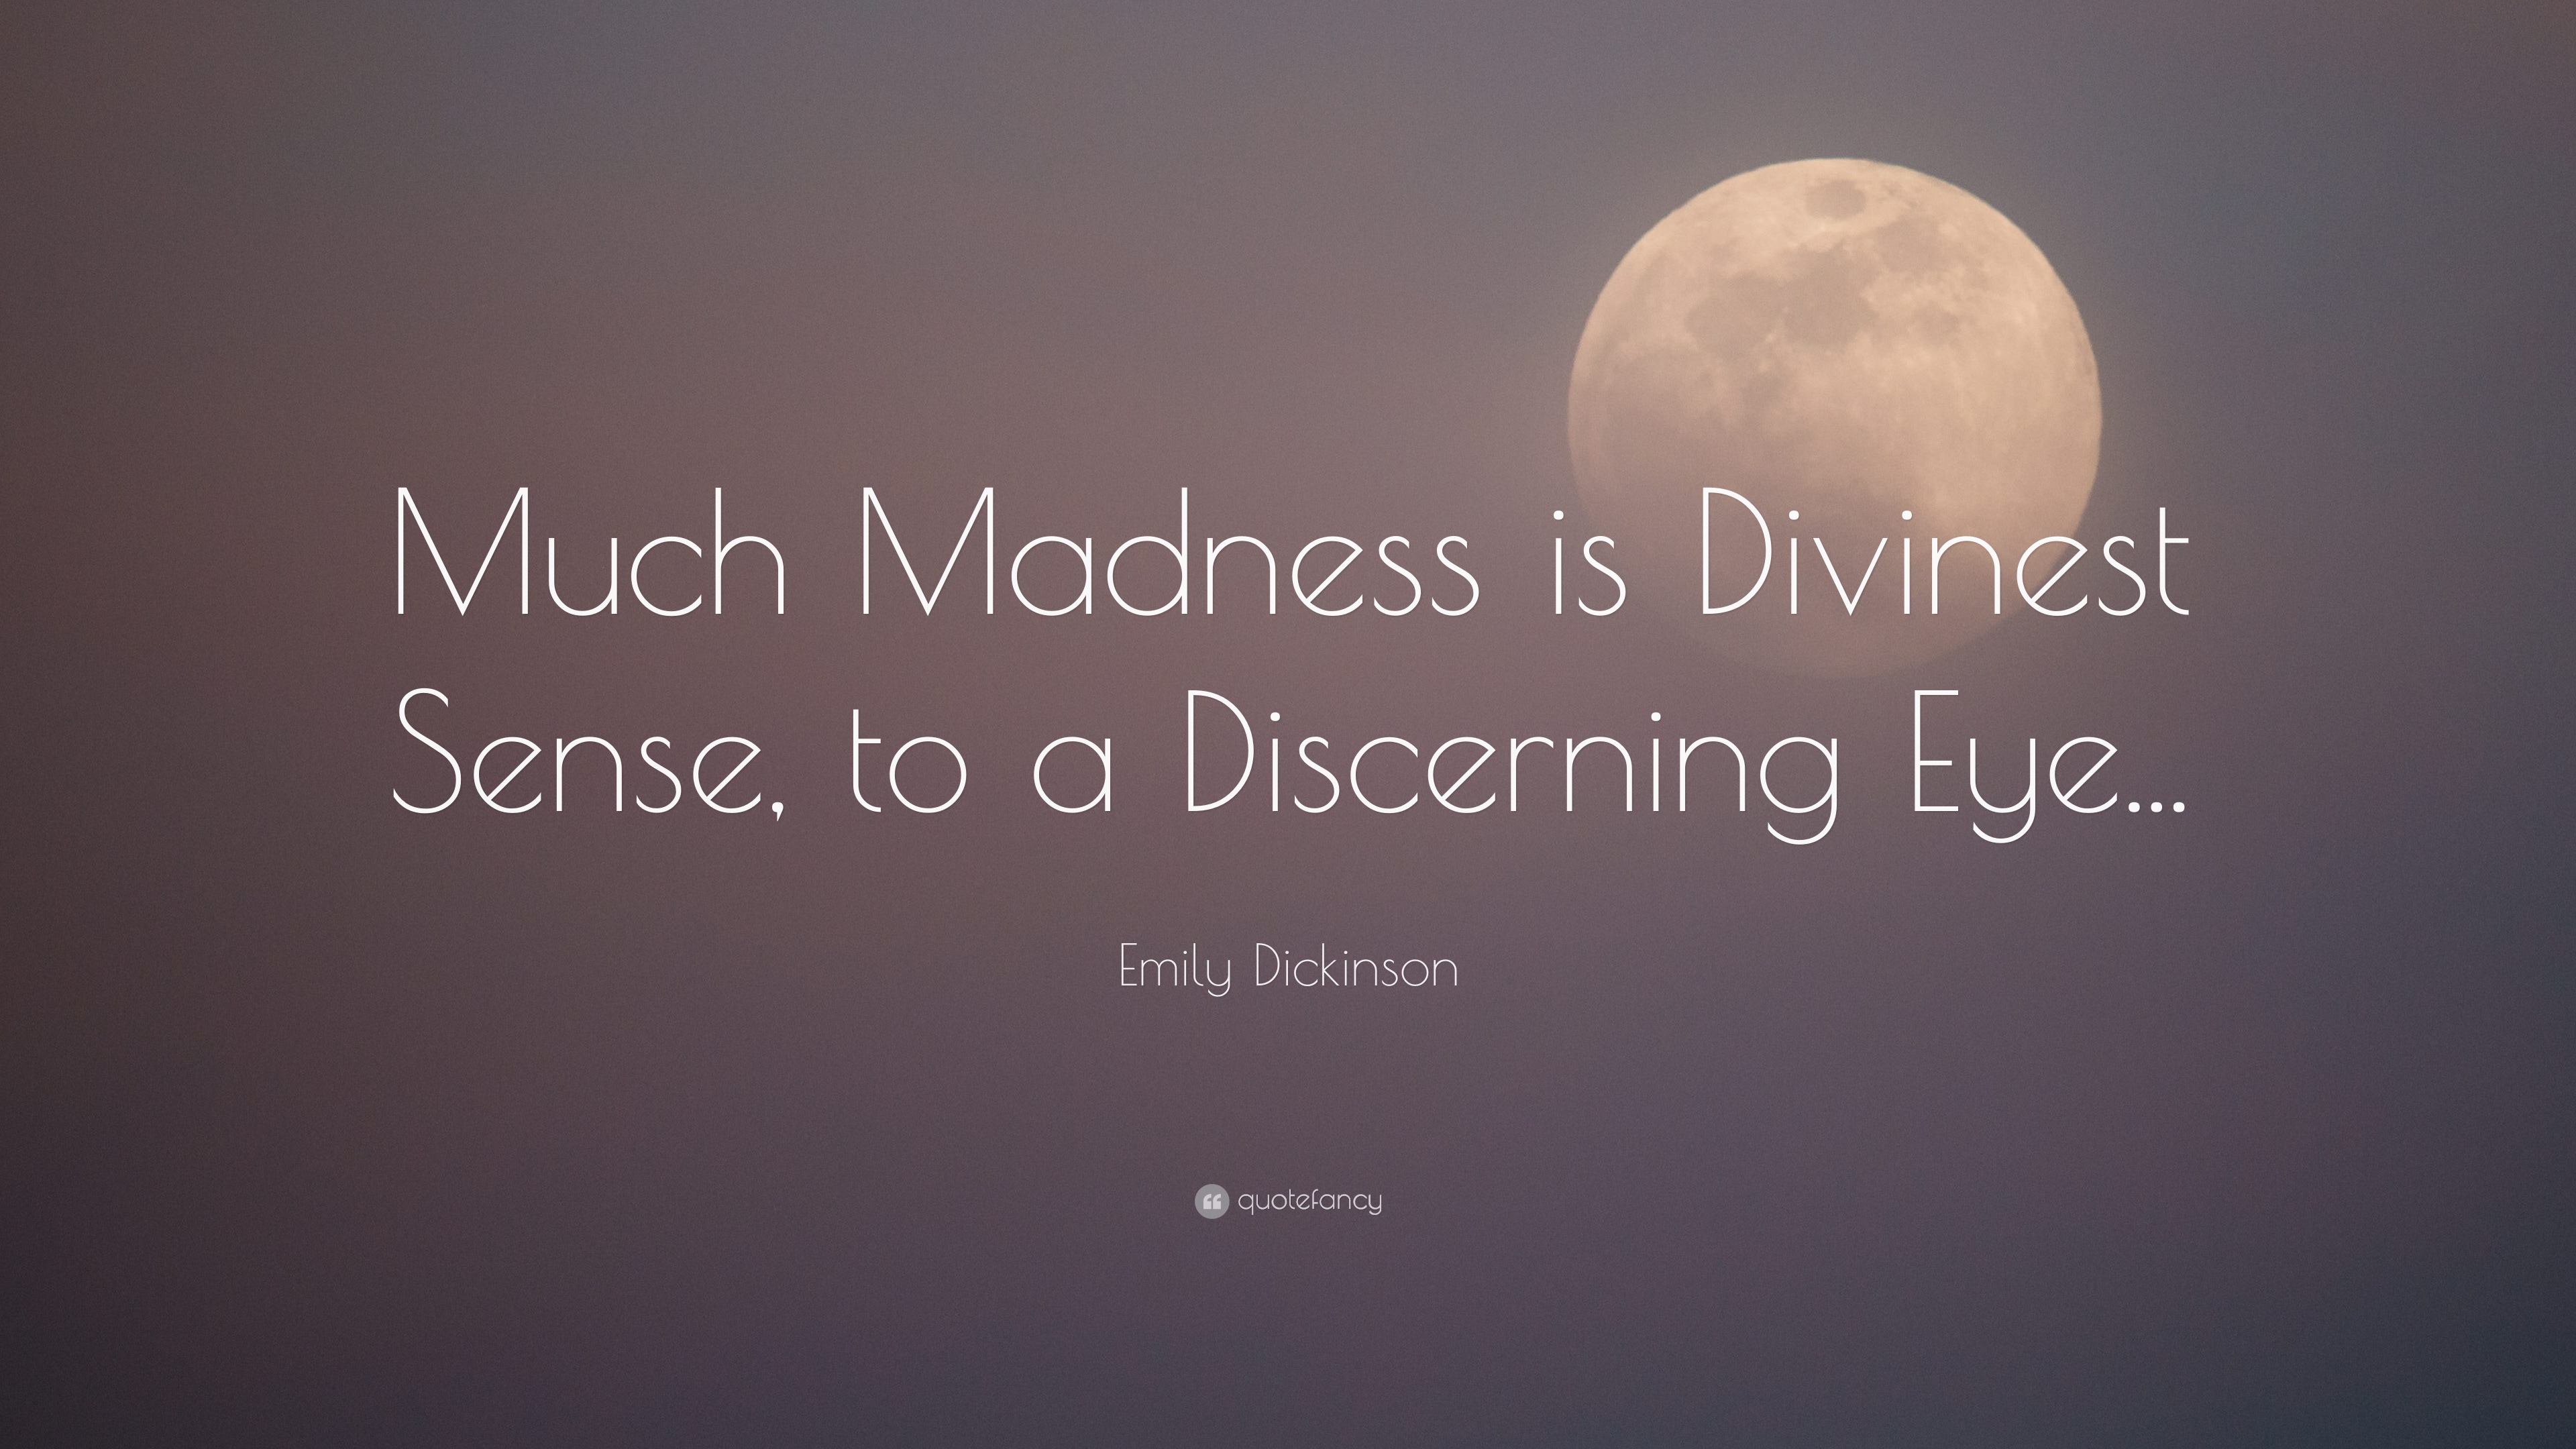 emily dickinson much madness is divinest sense analysis